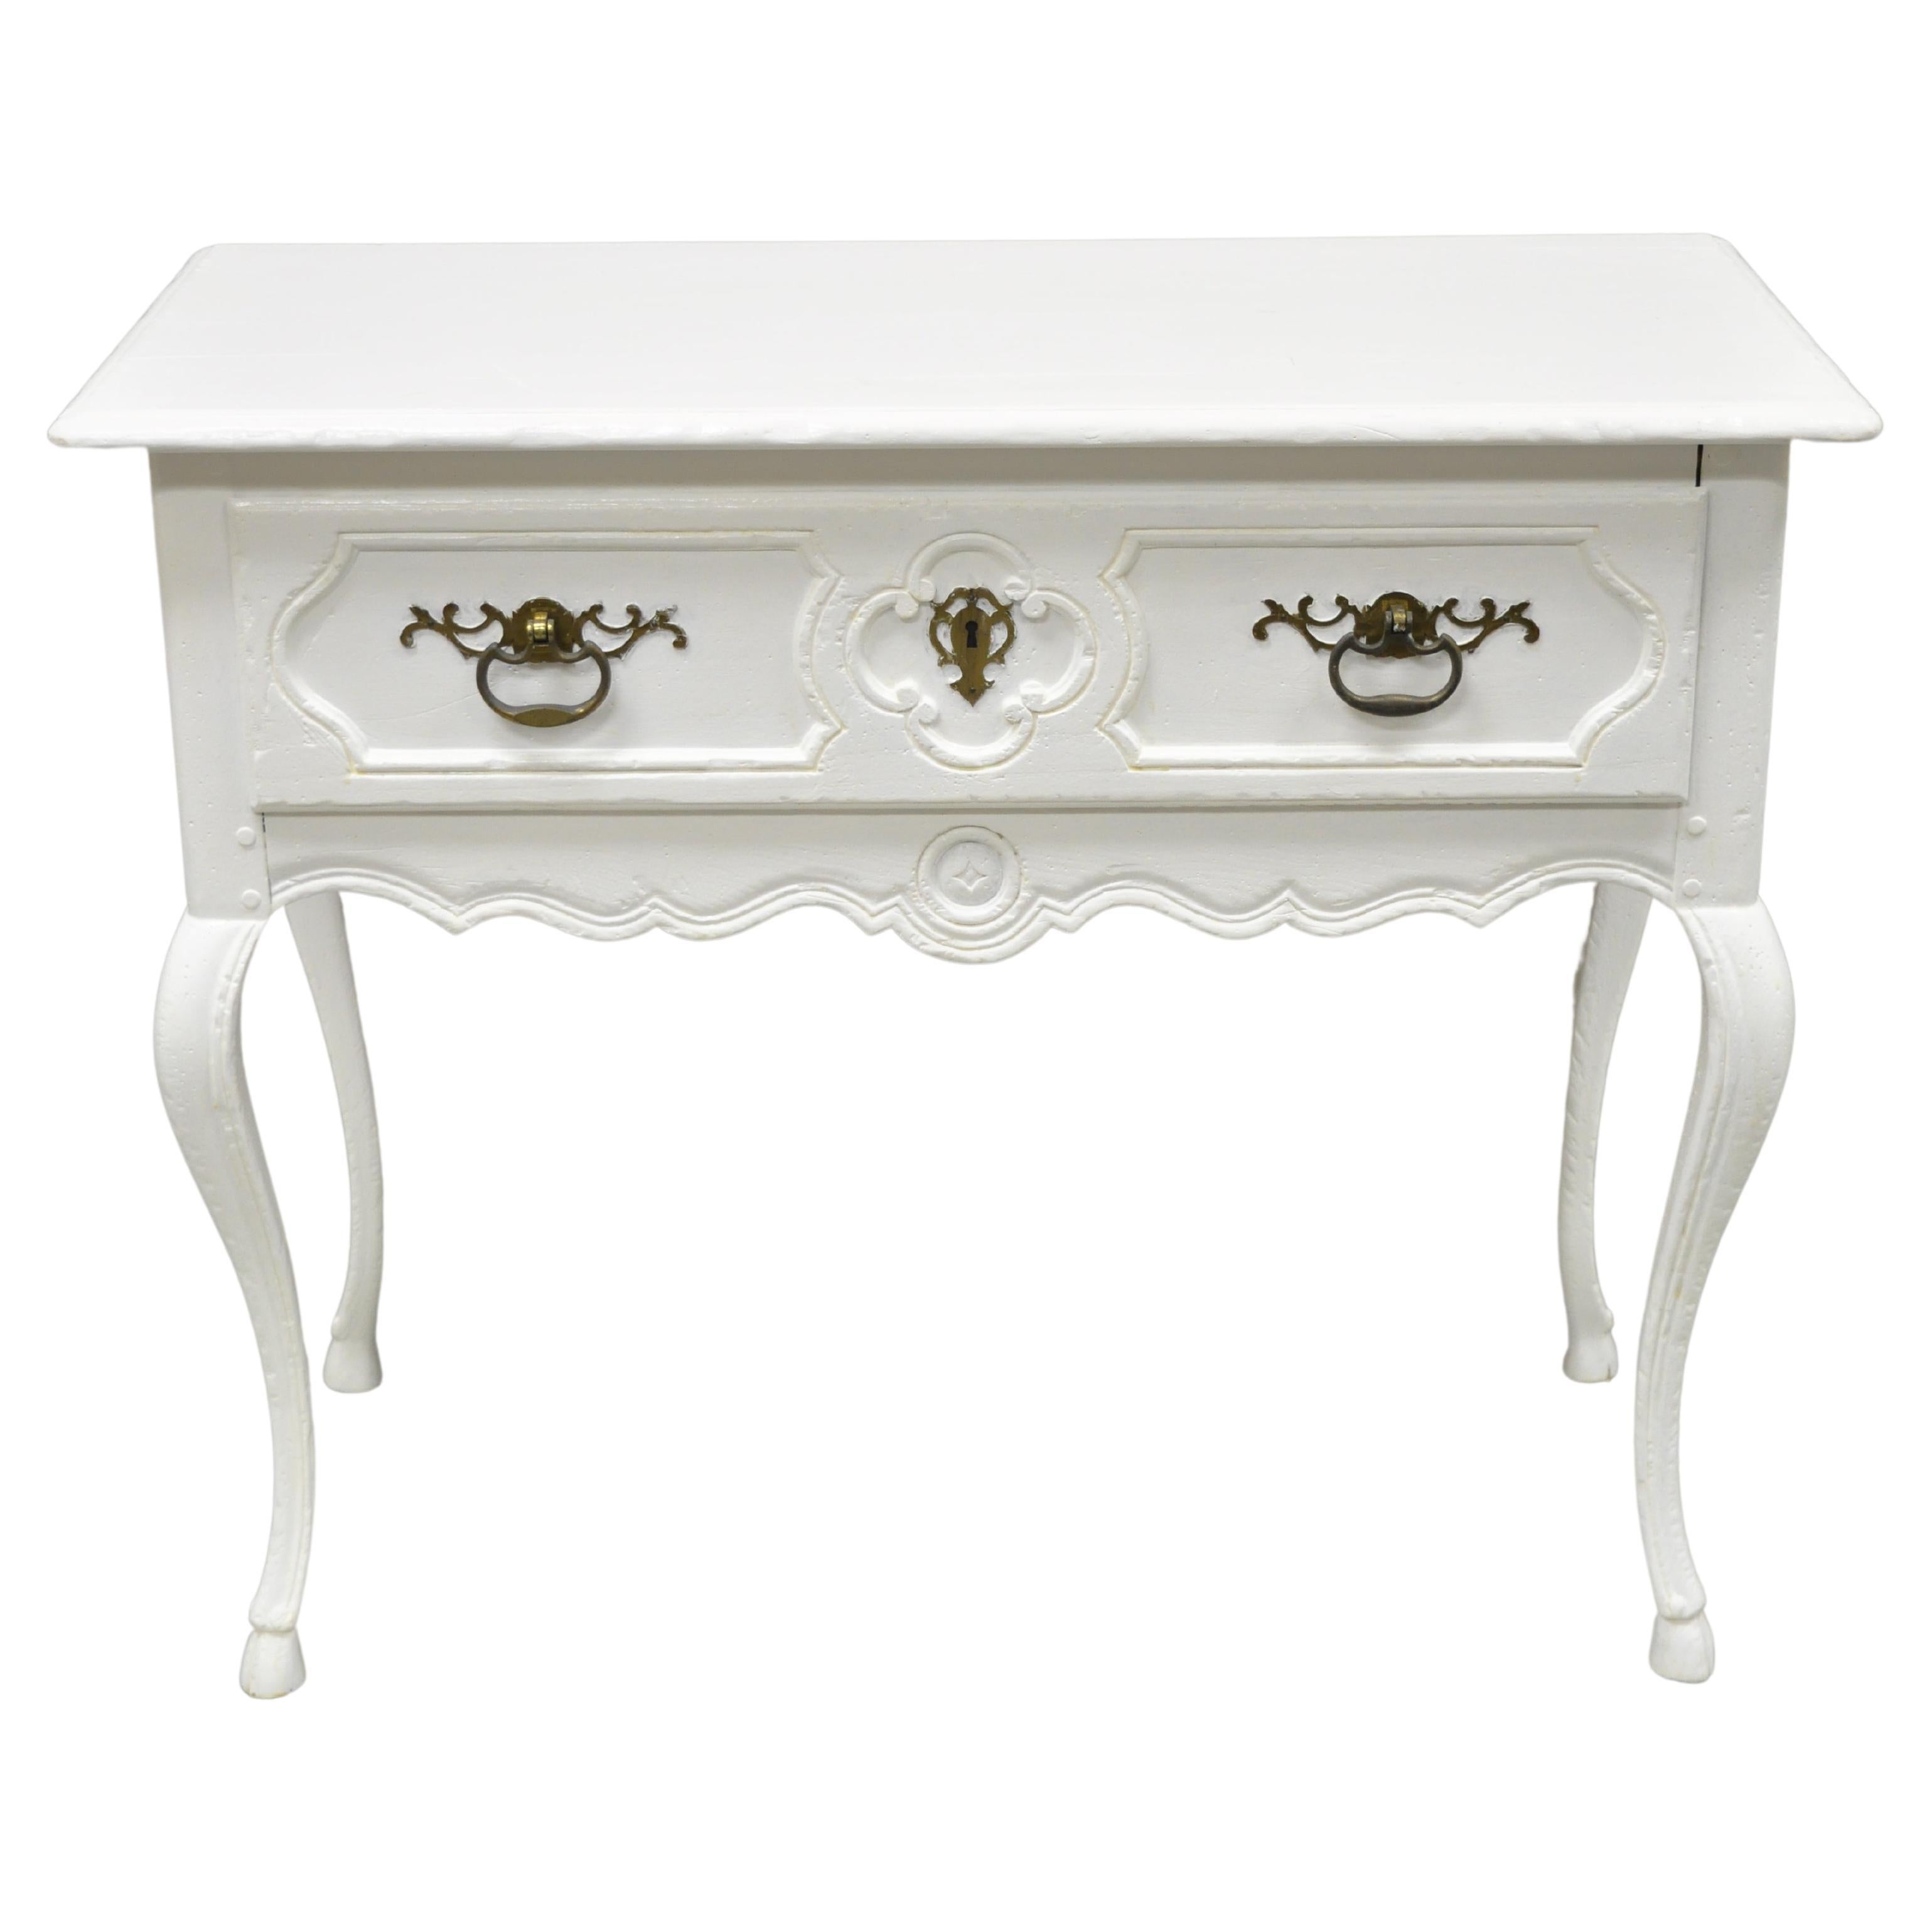 Vintage Baker French Country Regency Style Hoof Feet One Drawer Console Table For Sale